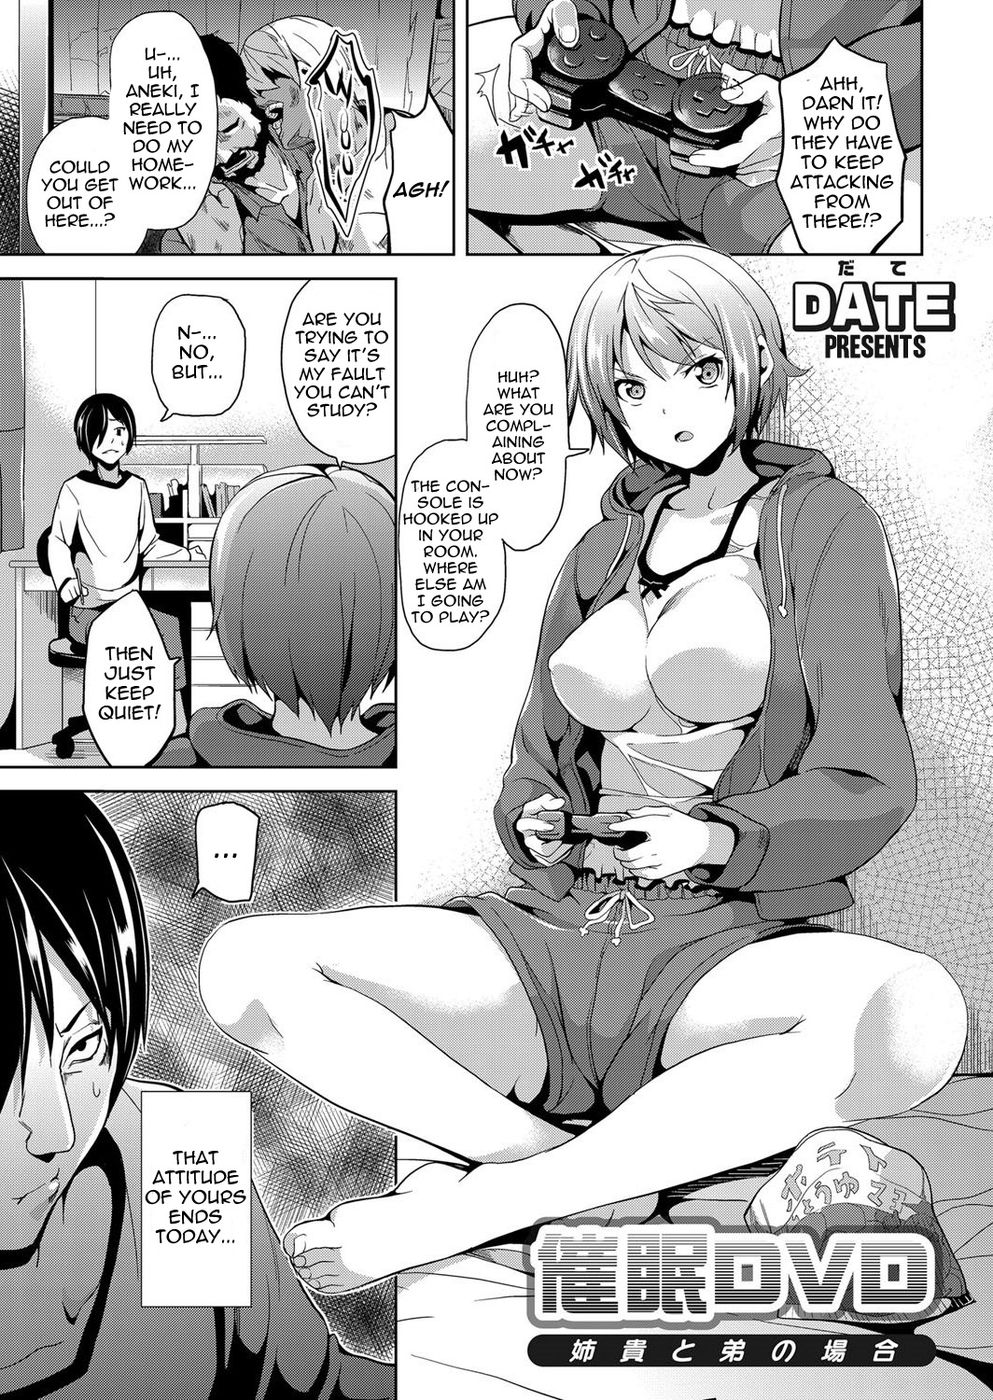 Nopelsex - Hypnosis DVD - The Case of the Elder Sister and Younger Brother-Read-Hentai  Manga Hentai Comic - Online porn video at mobile